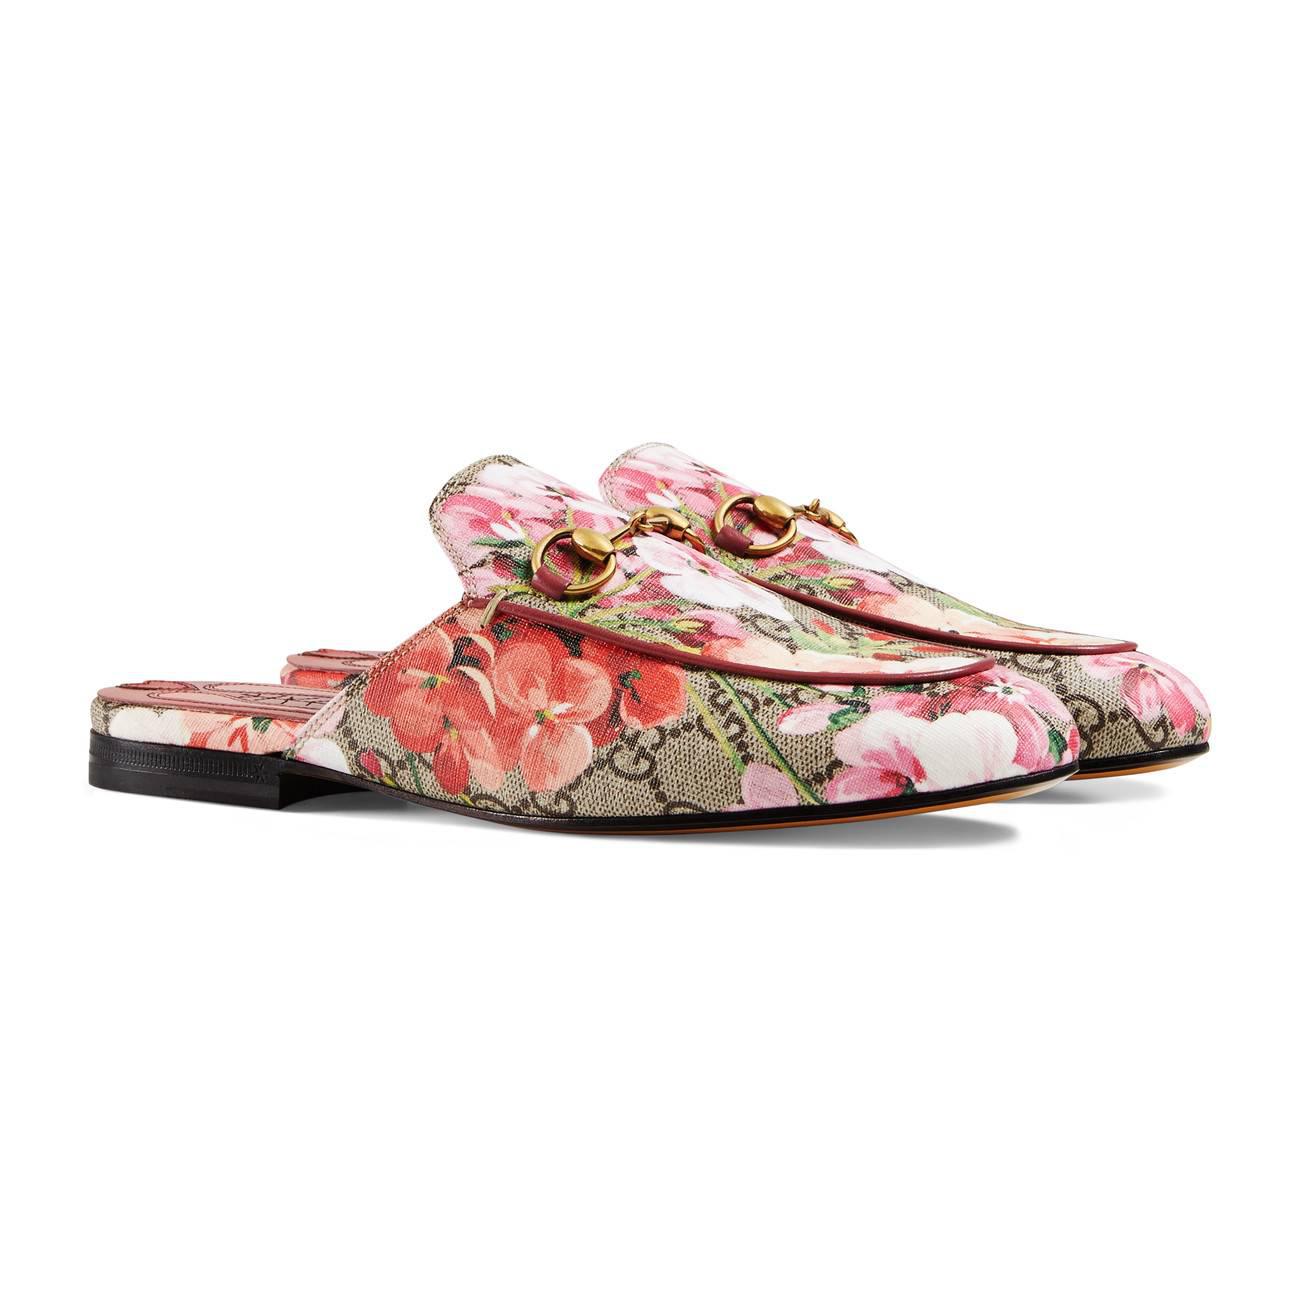 Gucci Canvas Princetown GG Blooms Slipper in Pink & Purple (Pink) - Lyst